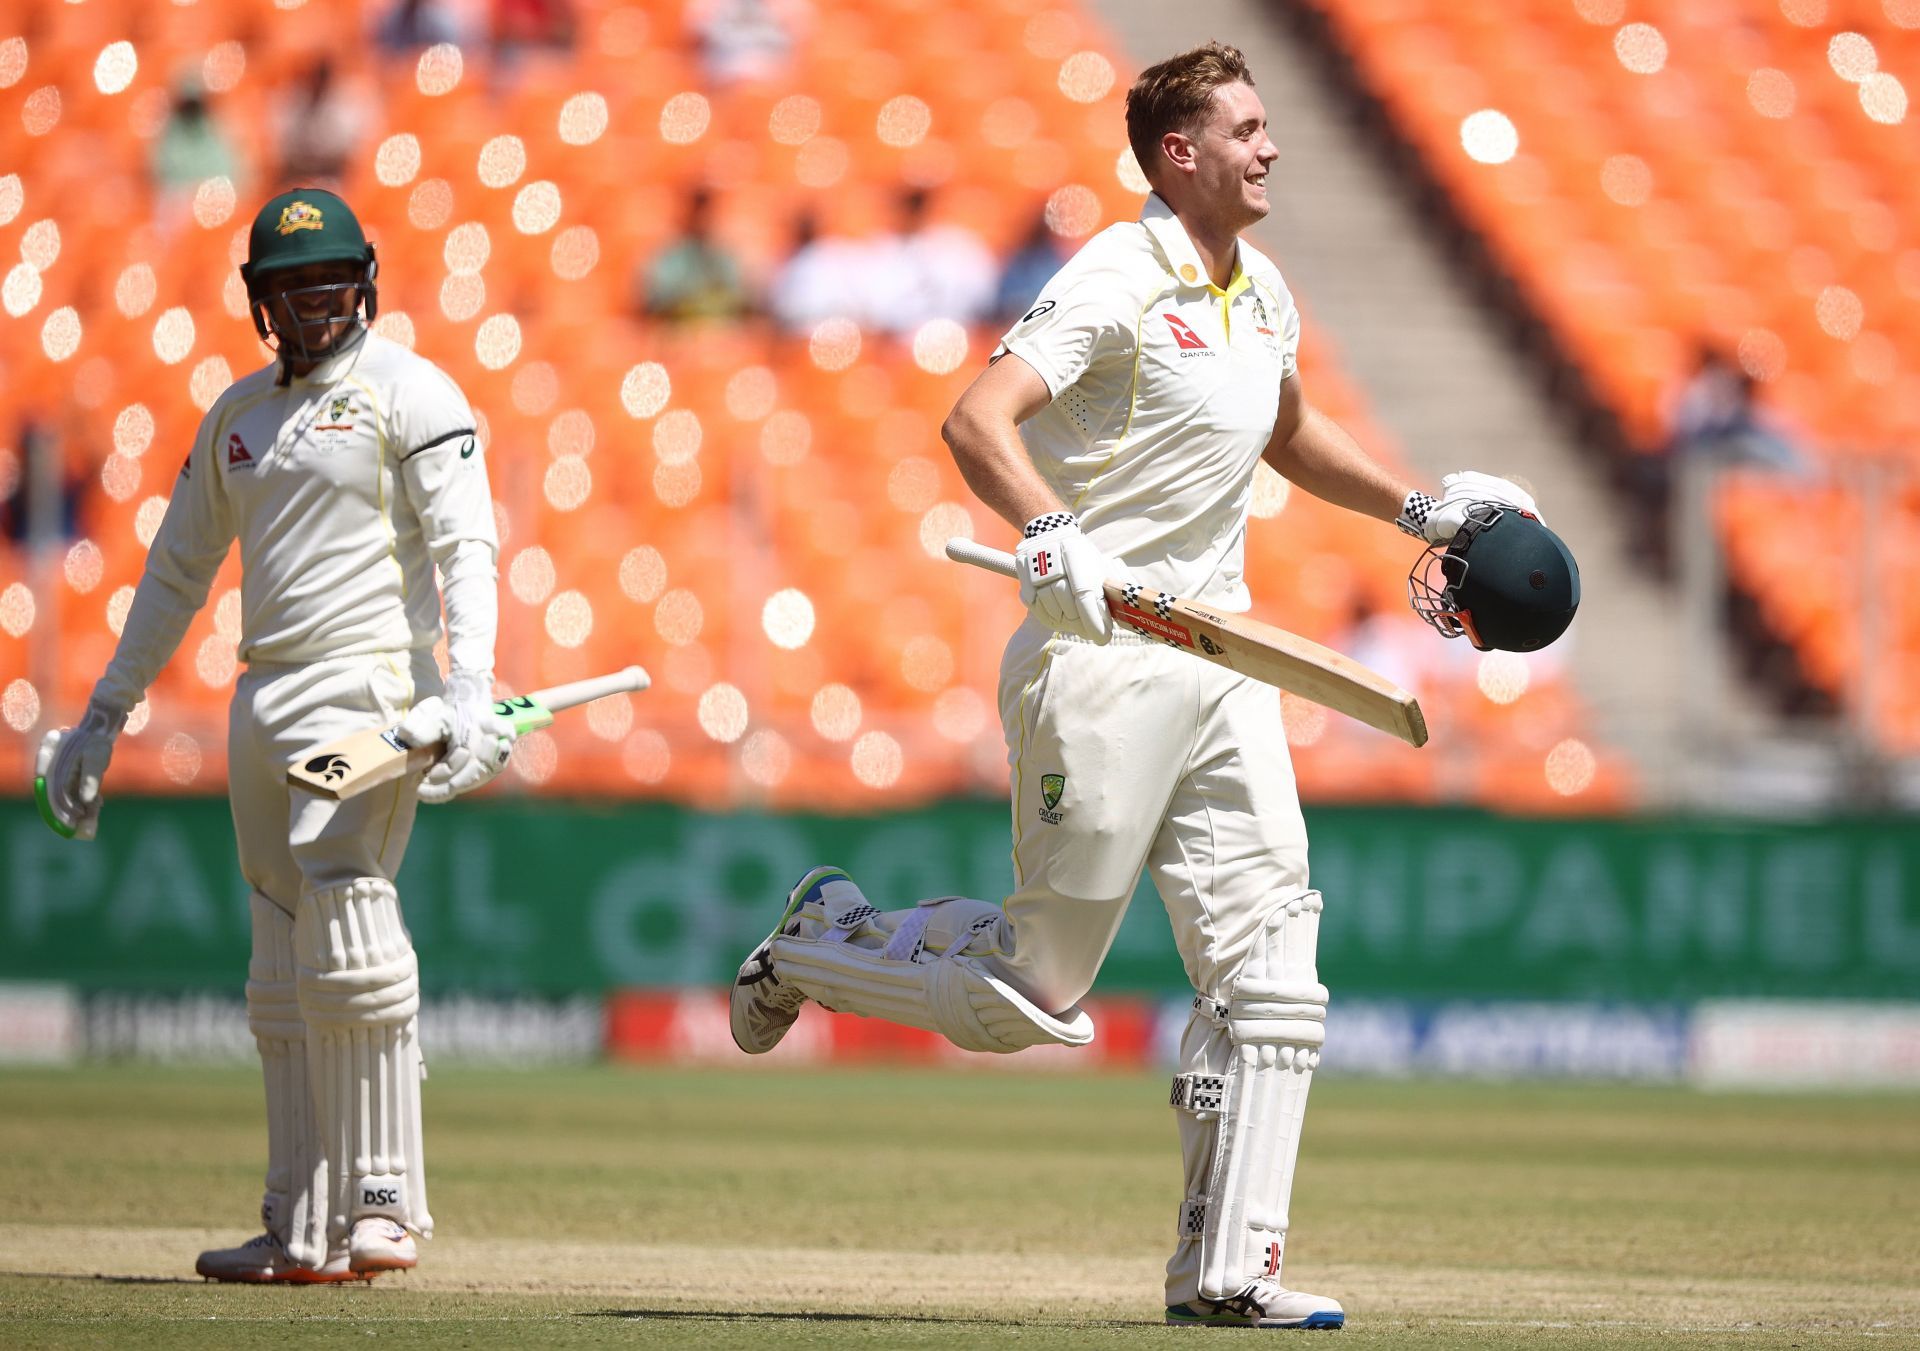 India v AUS - 4th Test: Day 2 (Image: Getty)